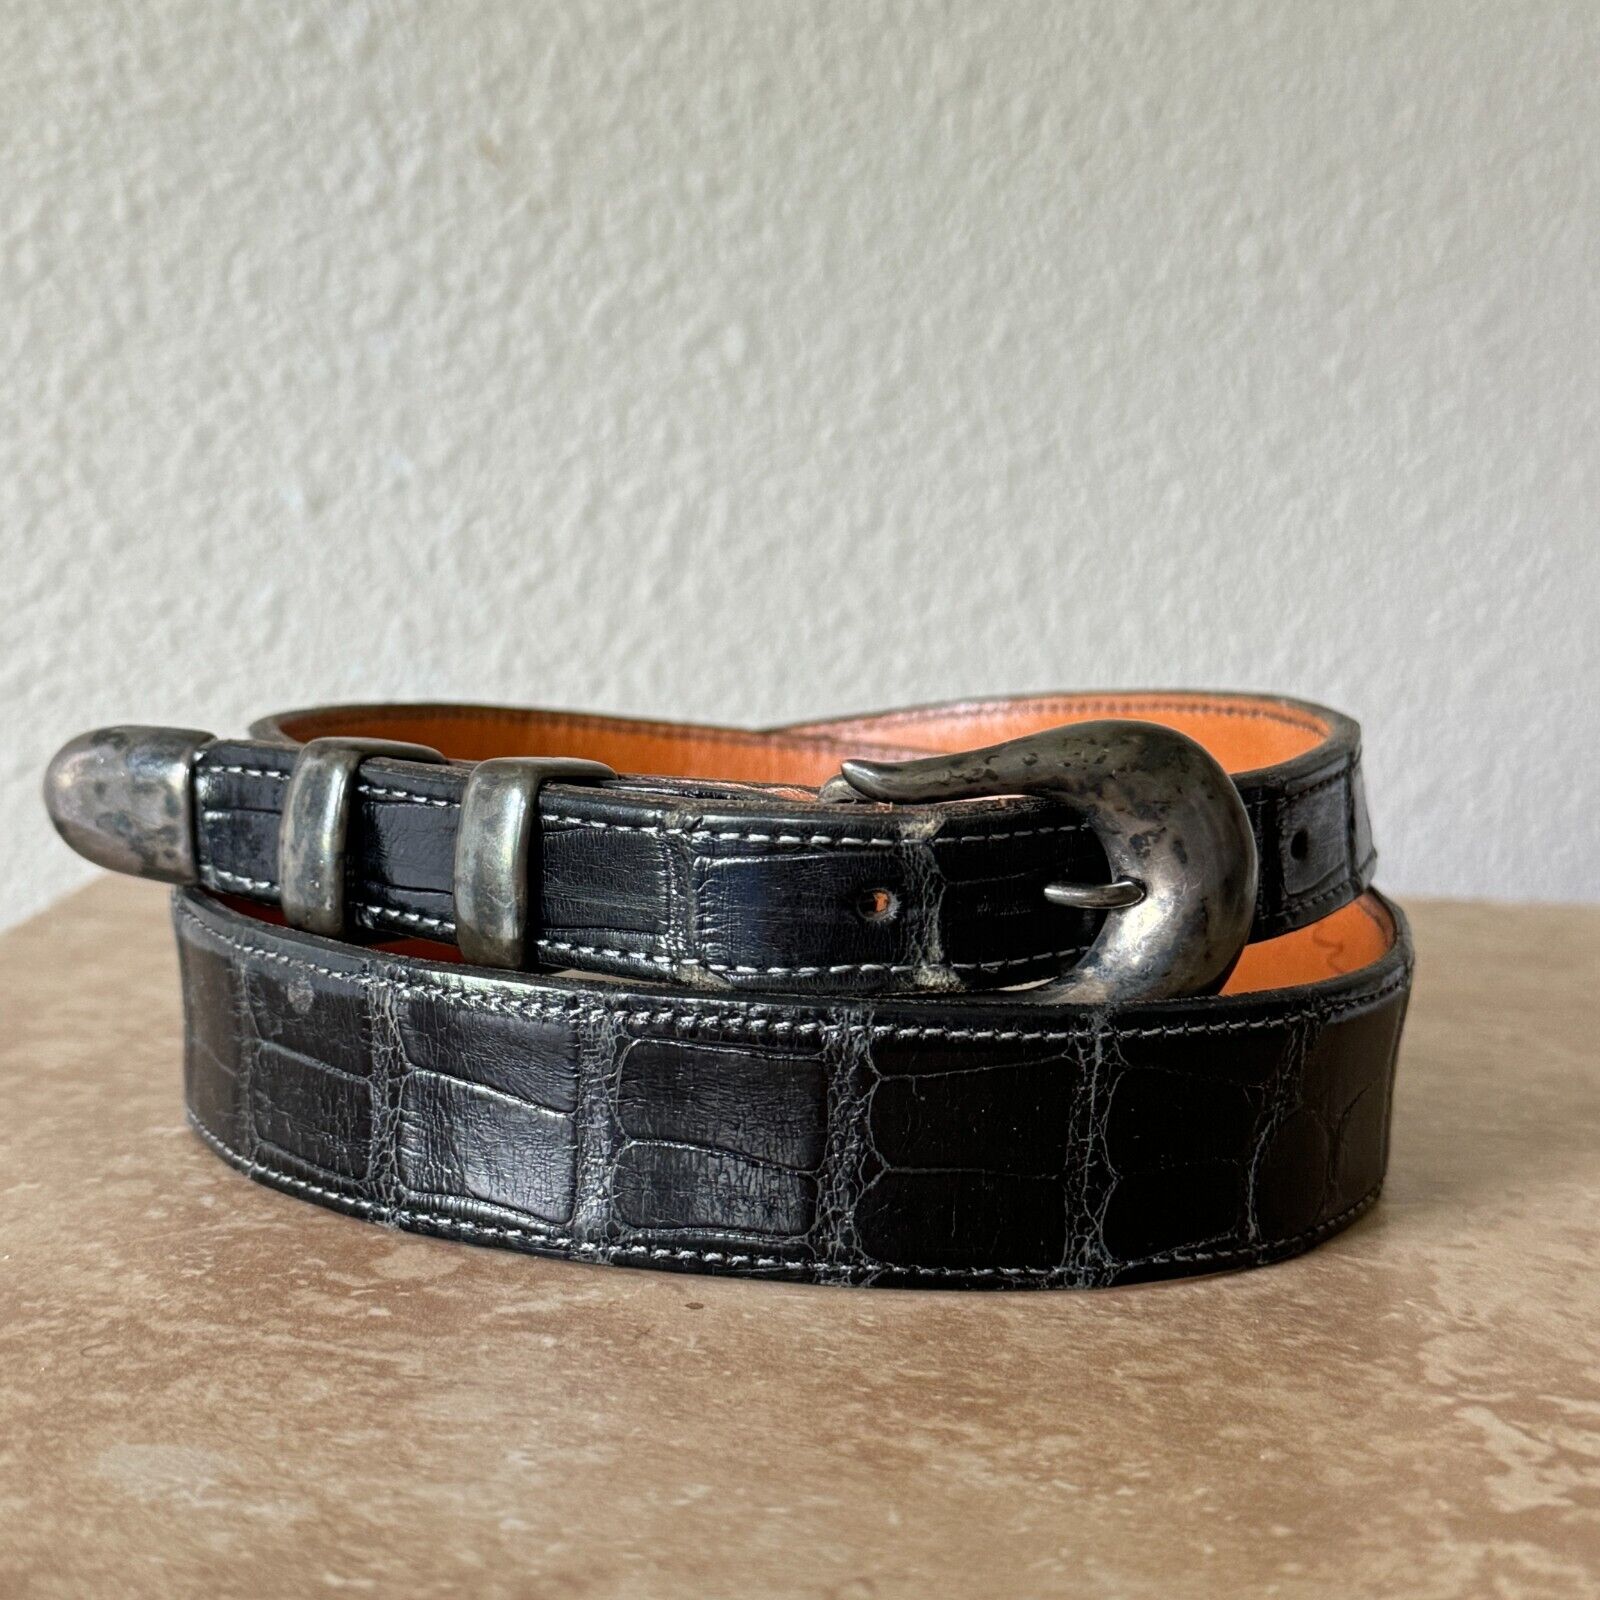 Vintage Chacon Belt Womens 34 Western Silver Buckle Hand Made Croc Leather Black